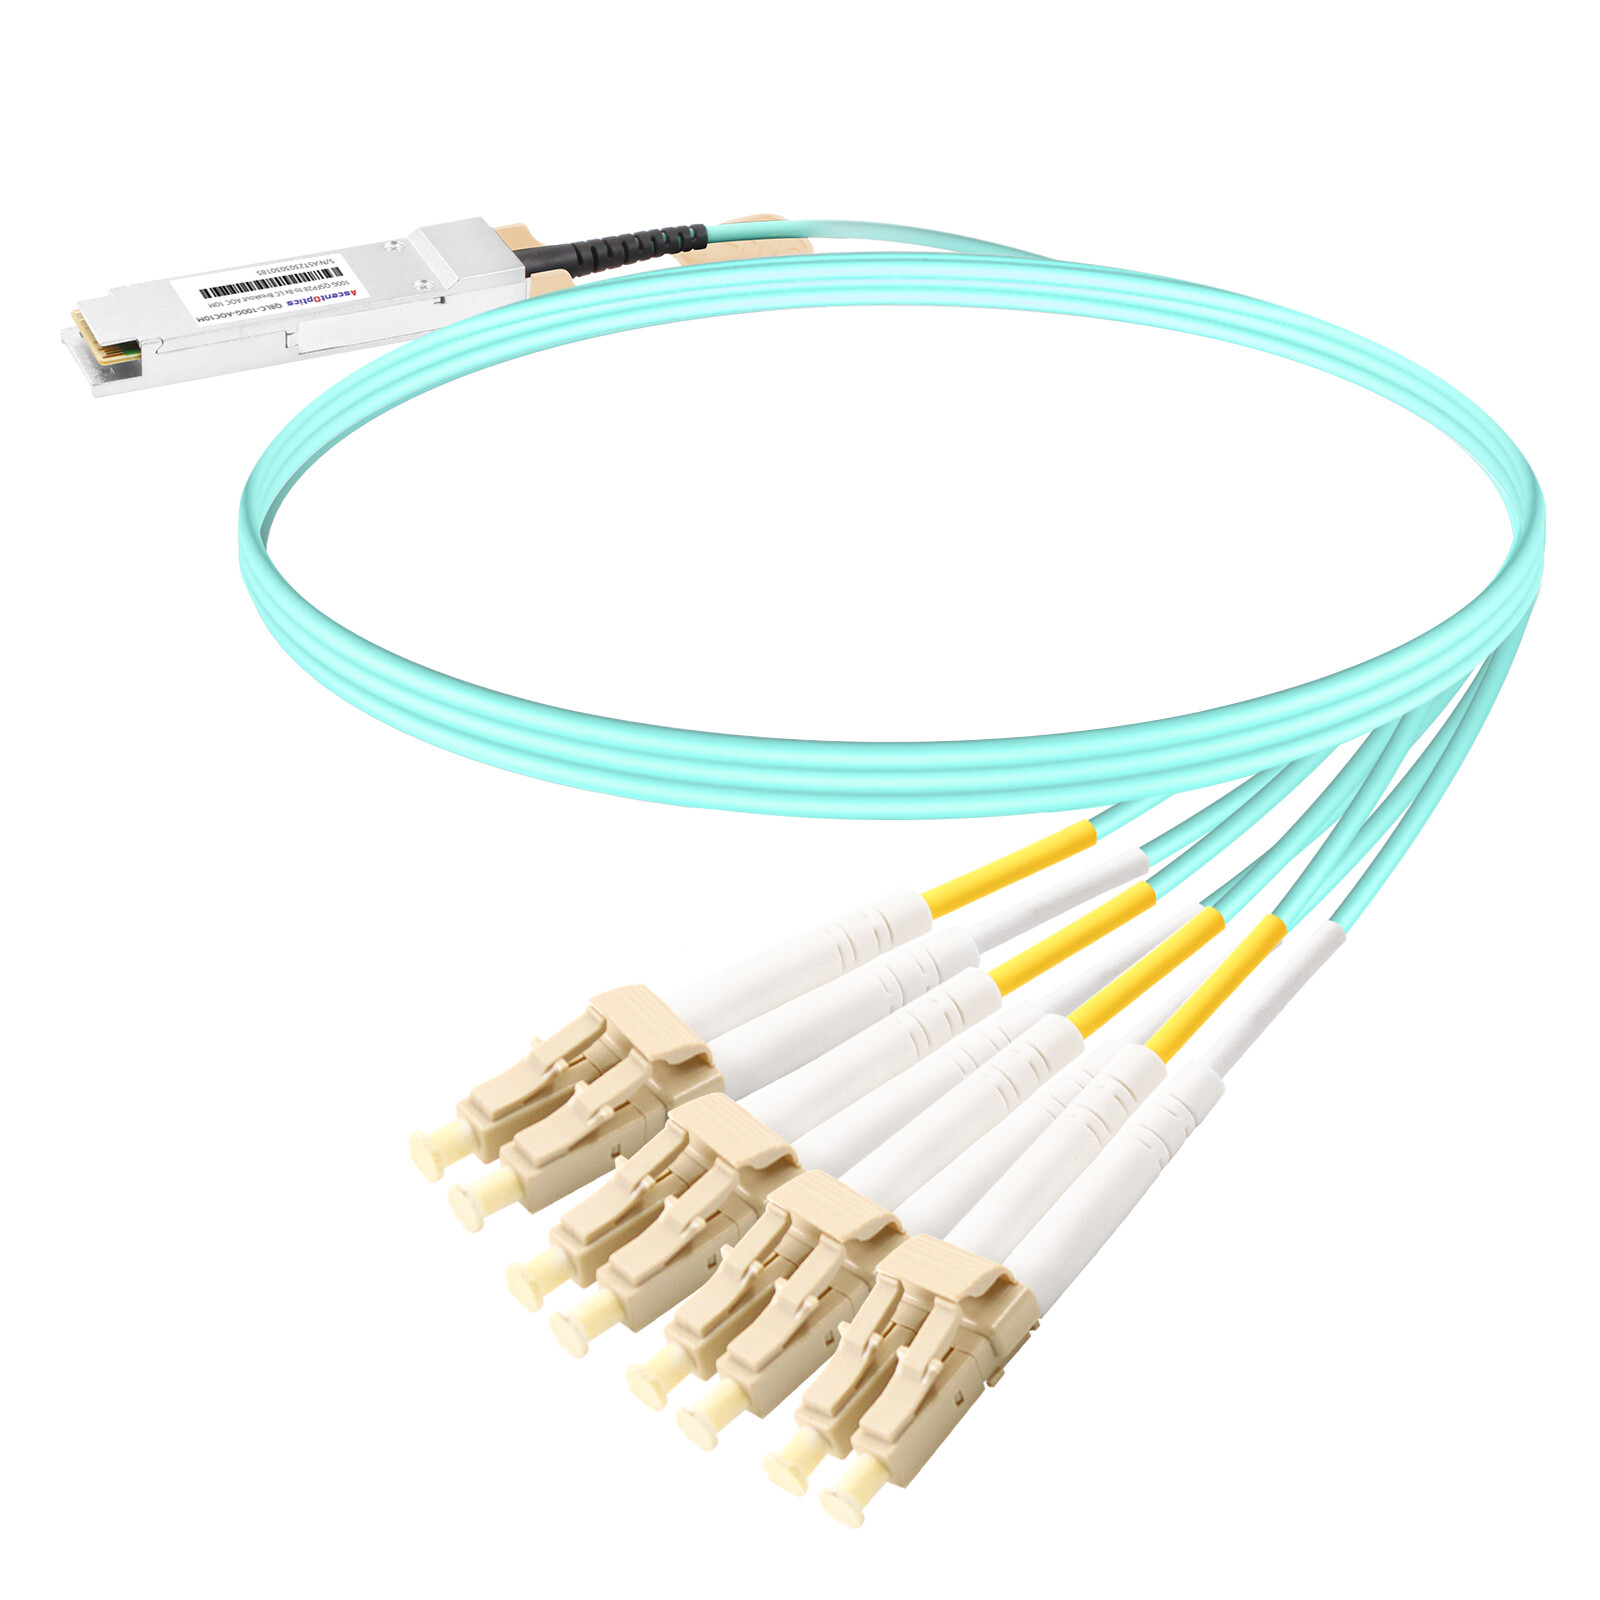 100G QSFP28 to 8x LC Breakout AOC Cable,10 Meters